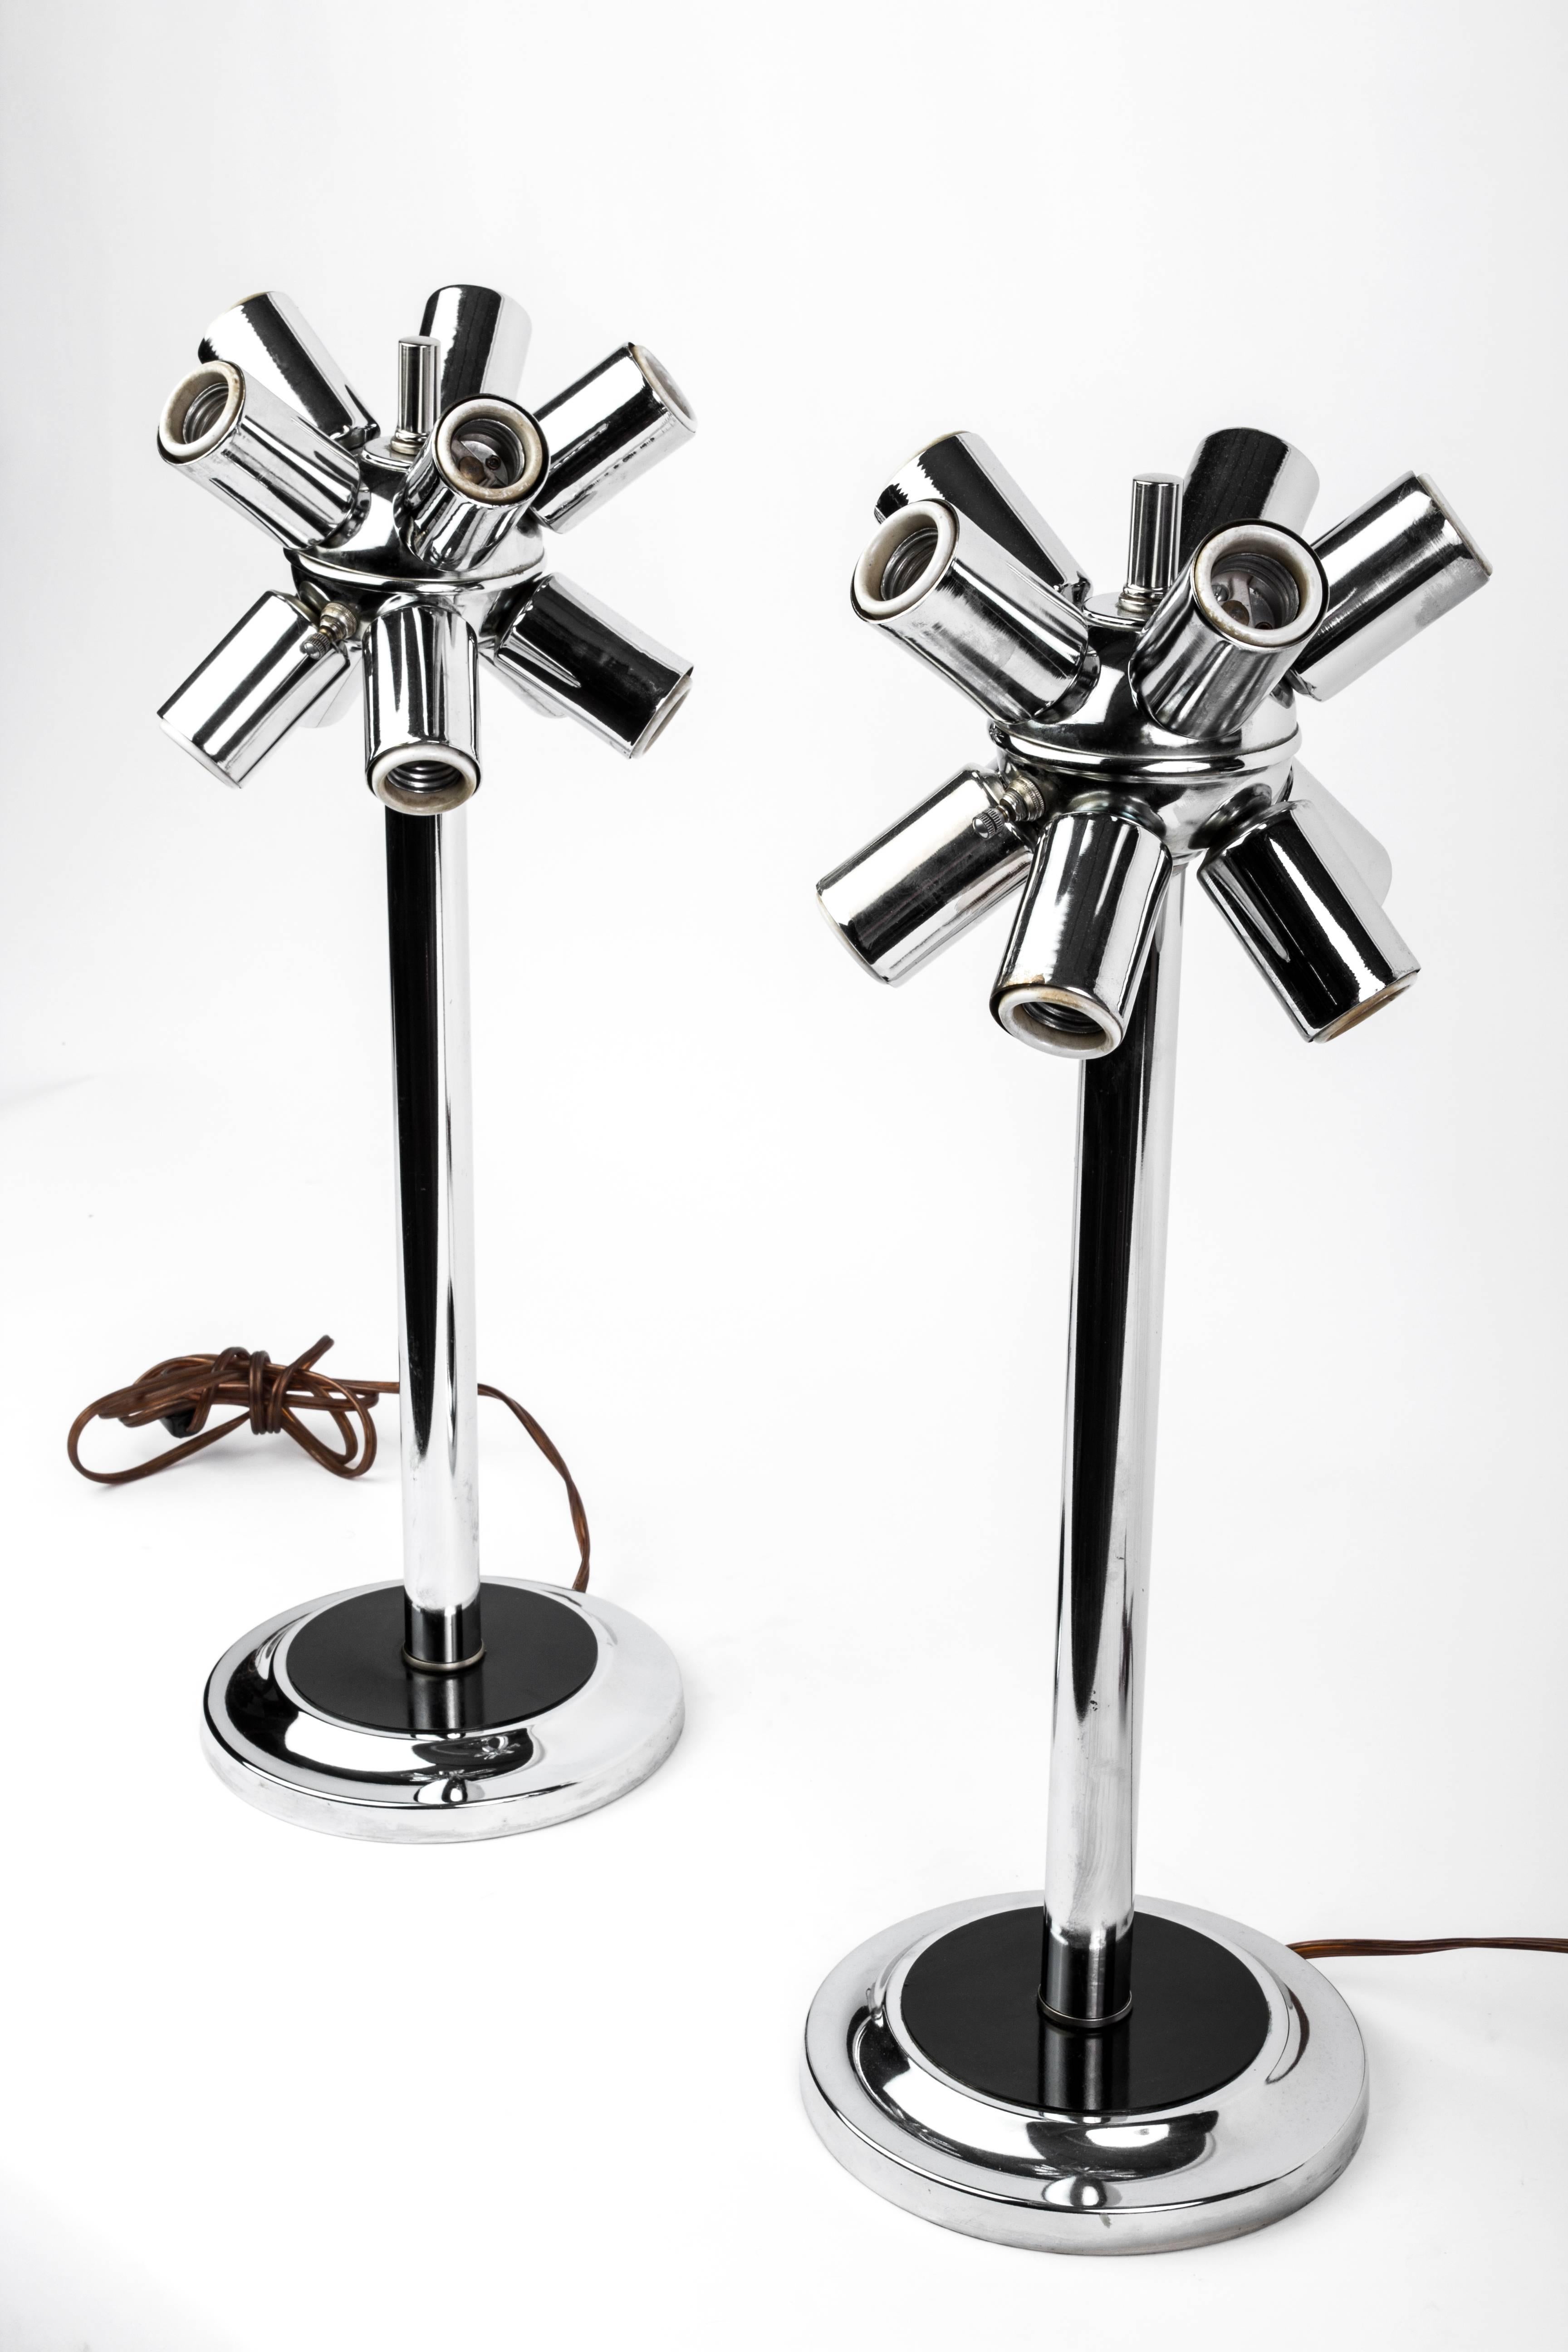 This superb pair of 1970s Mid-Century Modernist Sputnik table lamps feature an atomic form design on a chrome frame that holds (Ten) standard base globe bulbs each.

Made in Germany, circa 1970.